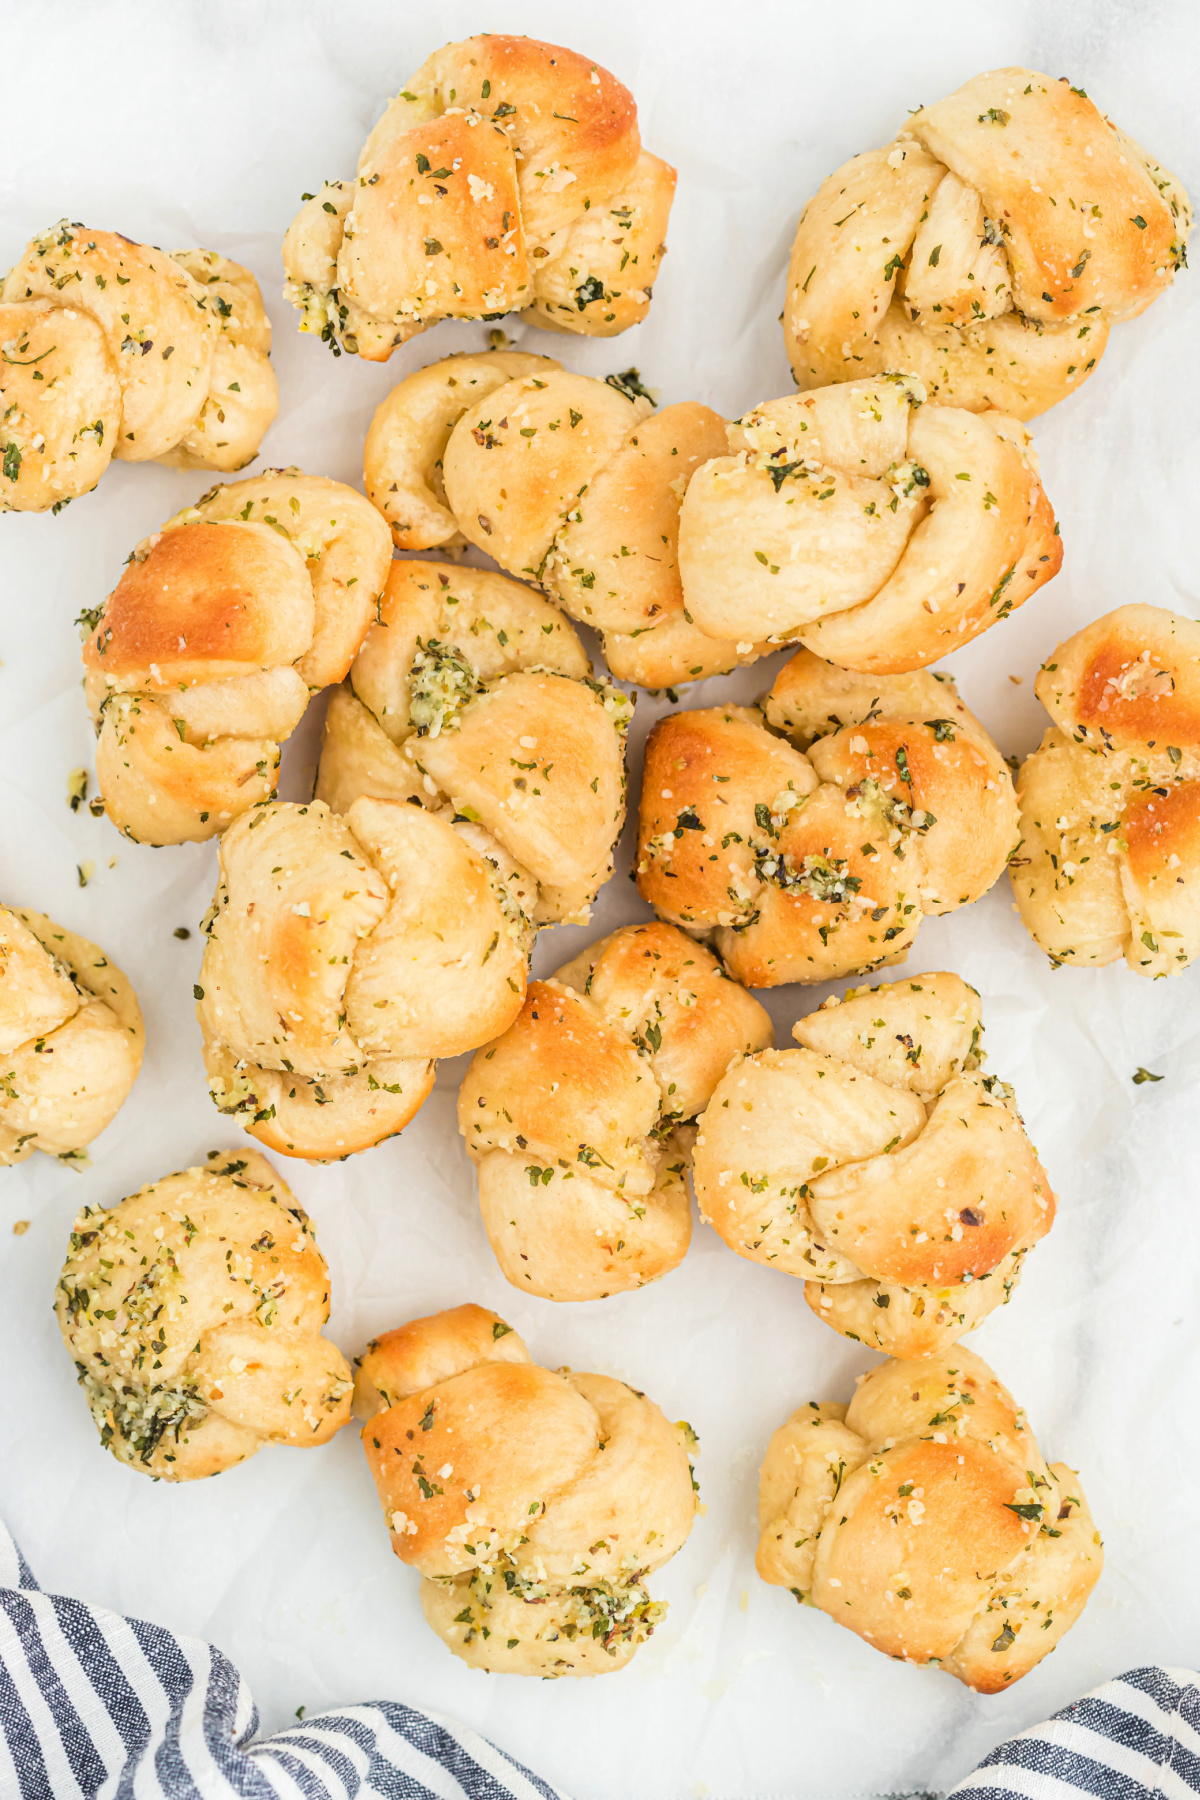 new york style garlic knots are made with premade pizza dough